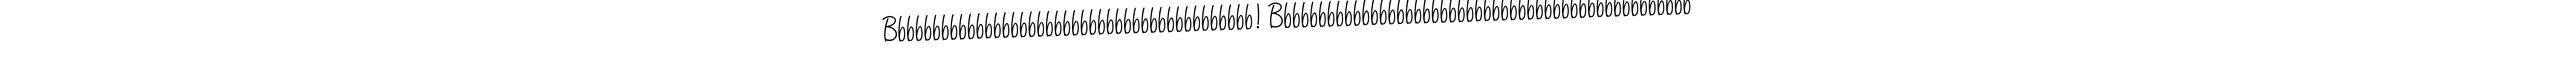 Also You can easily find your signature by using the search form. We will create Bbbbbbbbbbbbbbbbbbbbbbbbbbbbbbbbbbbbbbbbbb! Bbbbbbbbbbbbbbbbbbbbbbbbbbbbbbbbbbbbbbbbbbbbbbbb name handwritten signature images for you free of cost using Angelique-Rose-font-FFP sign style. Bbbbbbbbbbbbbbbbbbbbbbbbbbbbbbbbbbbbbbbbbb! Bbbbbbbbbbbbbbbbbbbbbbbbbbbbbbbbbbbbbbbbbbbbbbbb signature style 5 images and pictures png